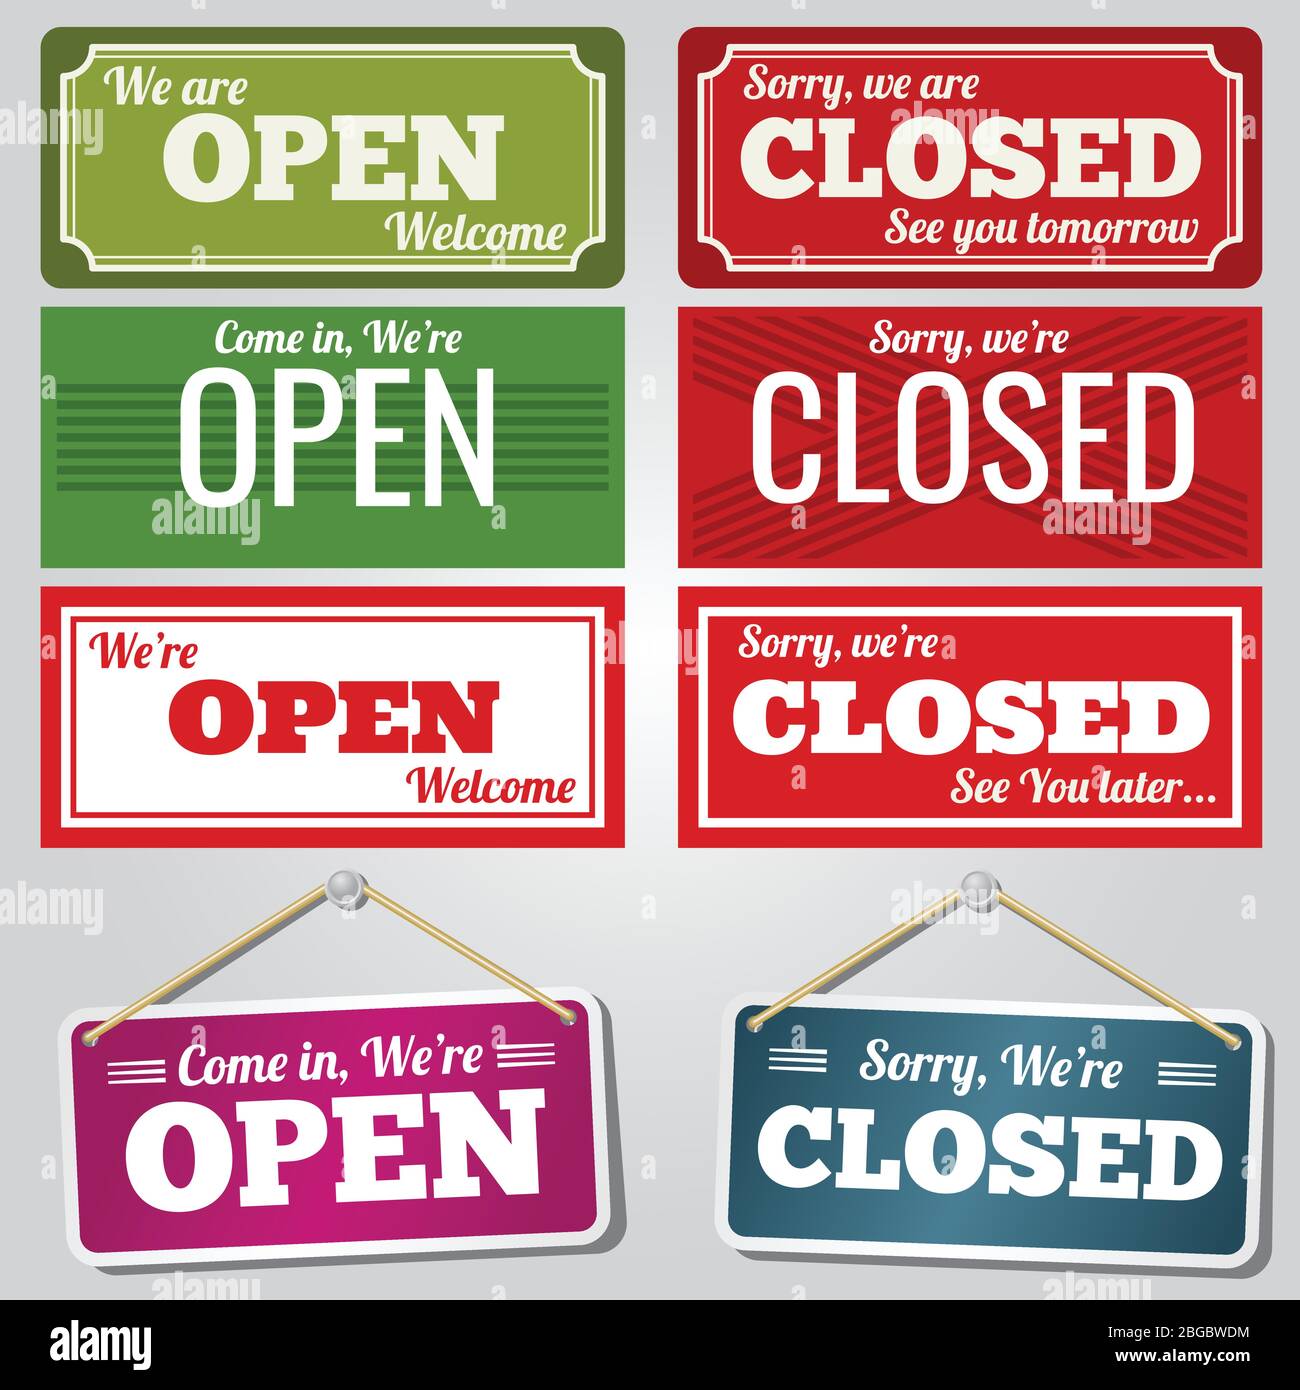 Open and closed vector store signs red and green. Shop banner door open illustration Stock Vector